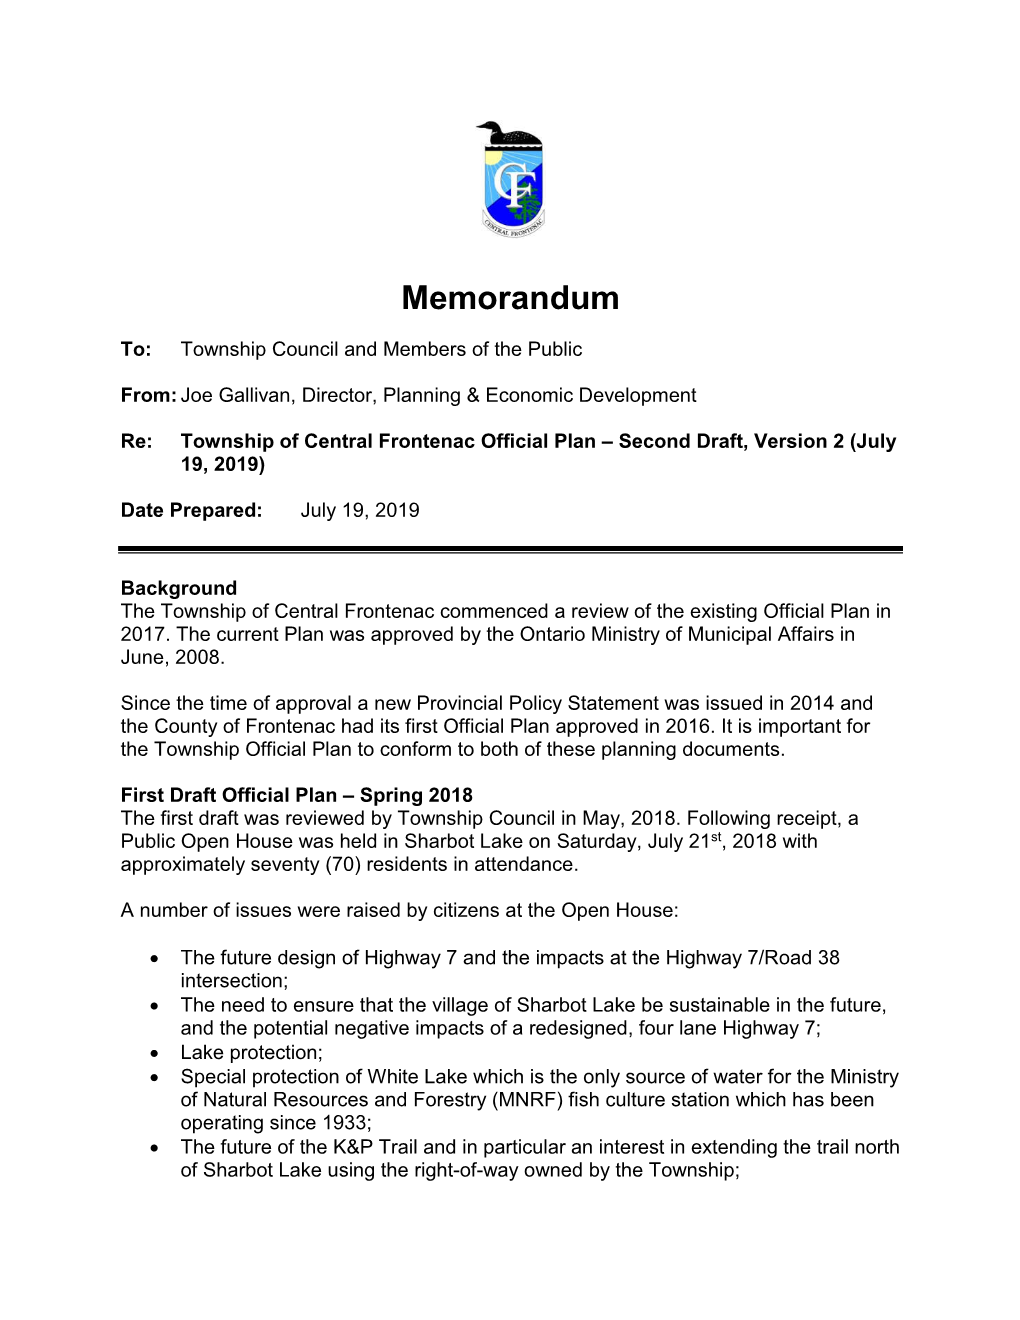 Township of Central Frontenac Official Plan – Second Draft, Version 2 (July 19, 2019)